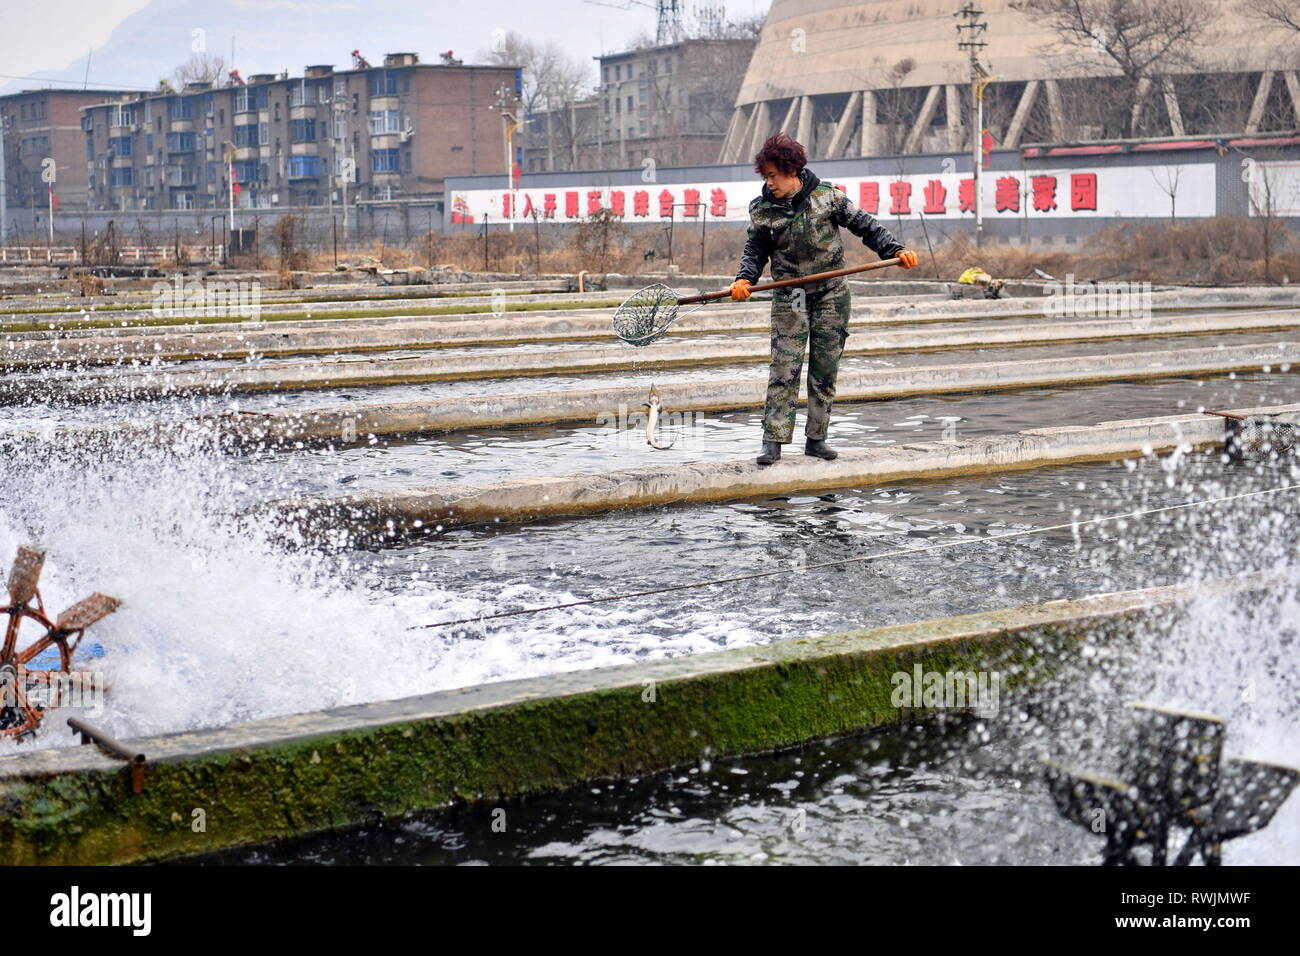 (190307) -- PINGDING, March 7, 2019 (Xinhua) -- Villager Kang Ruiqing fishes in a cooperative aqua farm in Podi Village, Niangziguan Town, Pingding County, north China's Shanxi Province, on Feb. 26, 2019. The women of Niangziguan Town have played a vital role in developing local tourism industry under a poverty alleviation campaign. Taking tourist experience into consideration, they have made thorough plans to improve key service factors such as routes, catering and accommodation. In turn, the number of tourists have increased. All residents in Niangziguan Town have been helped out of poverty  Stock Photo